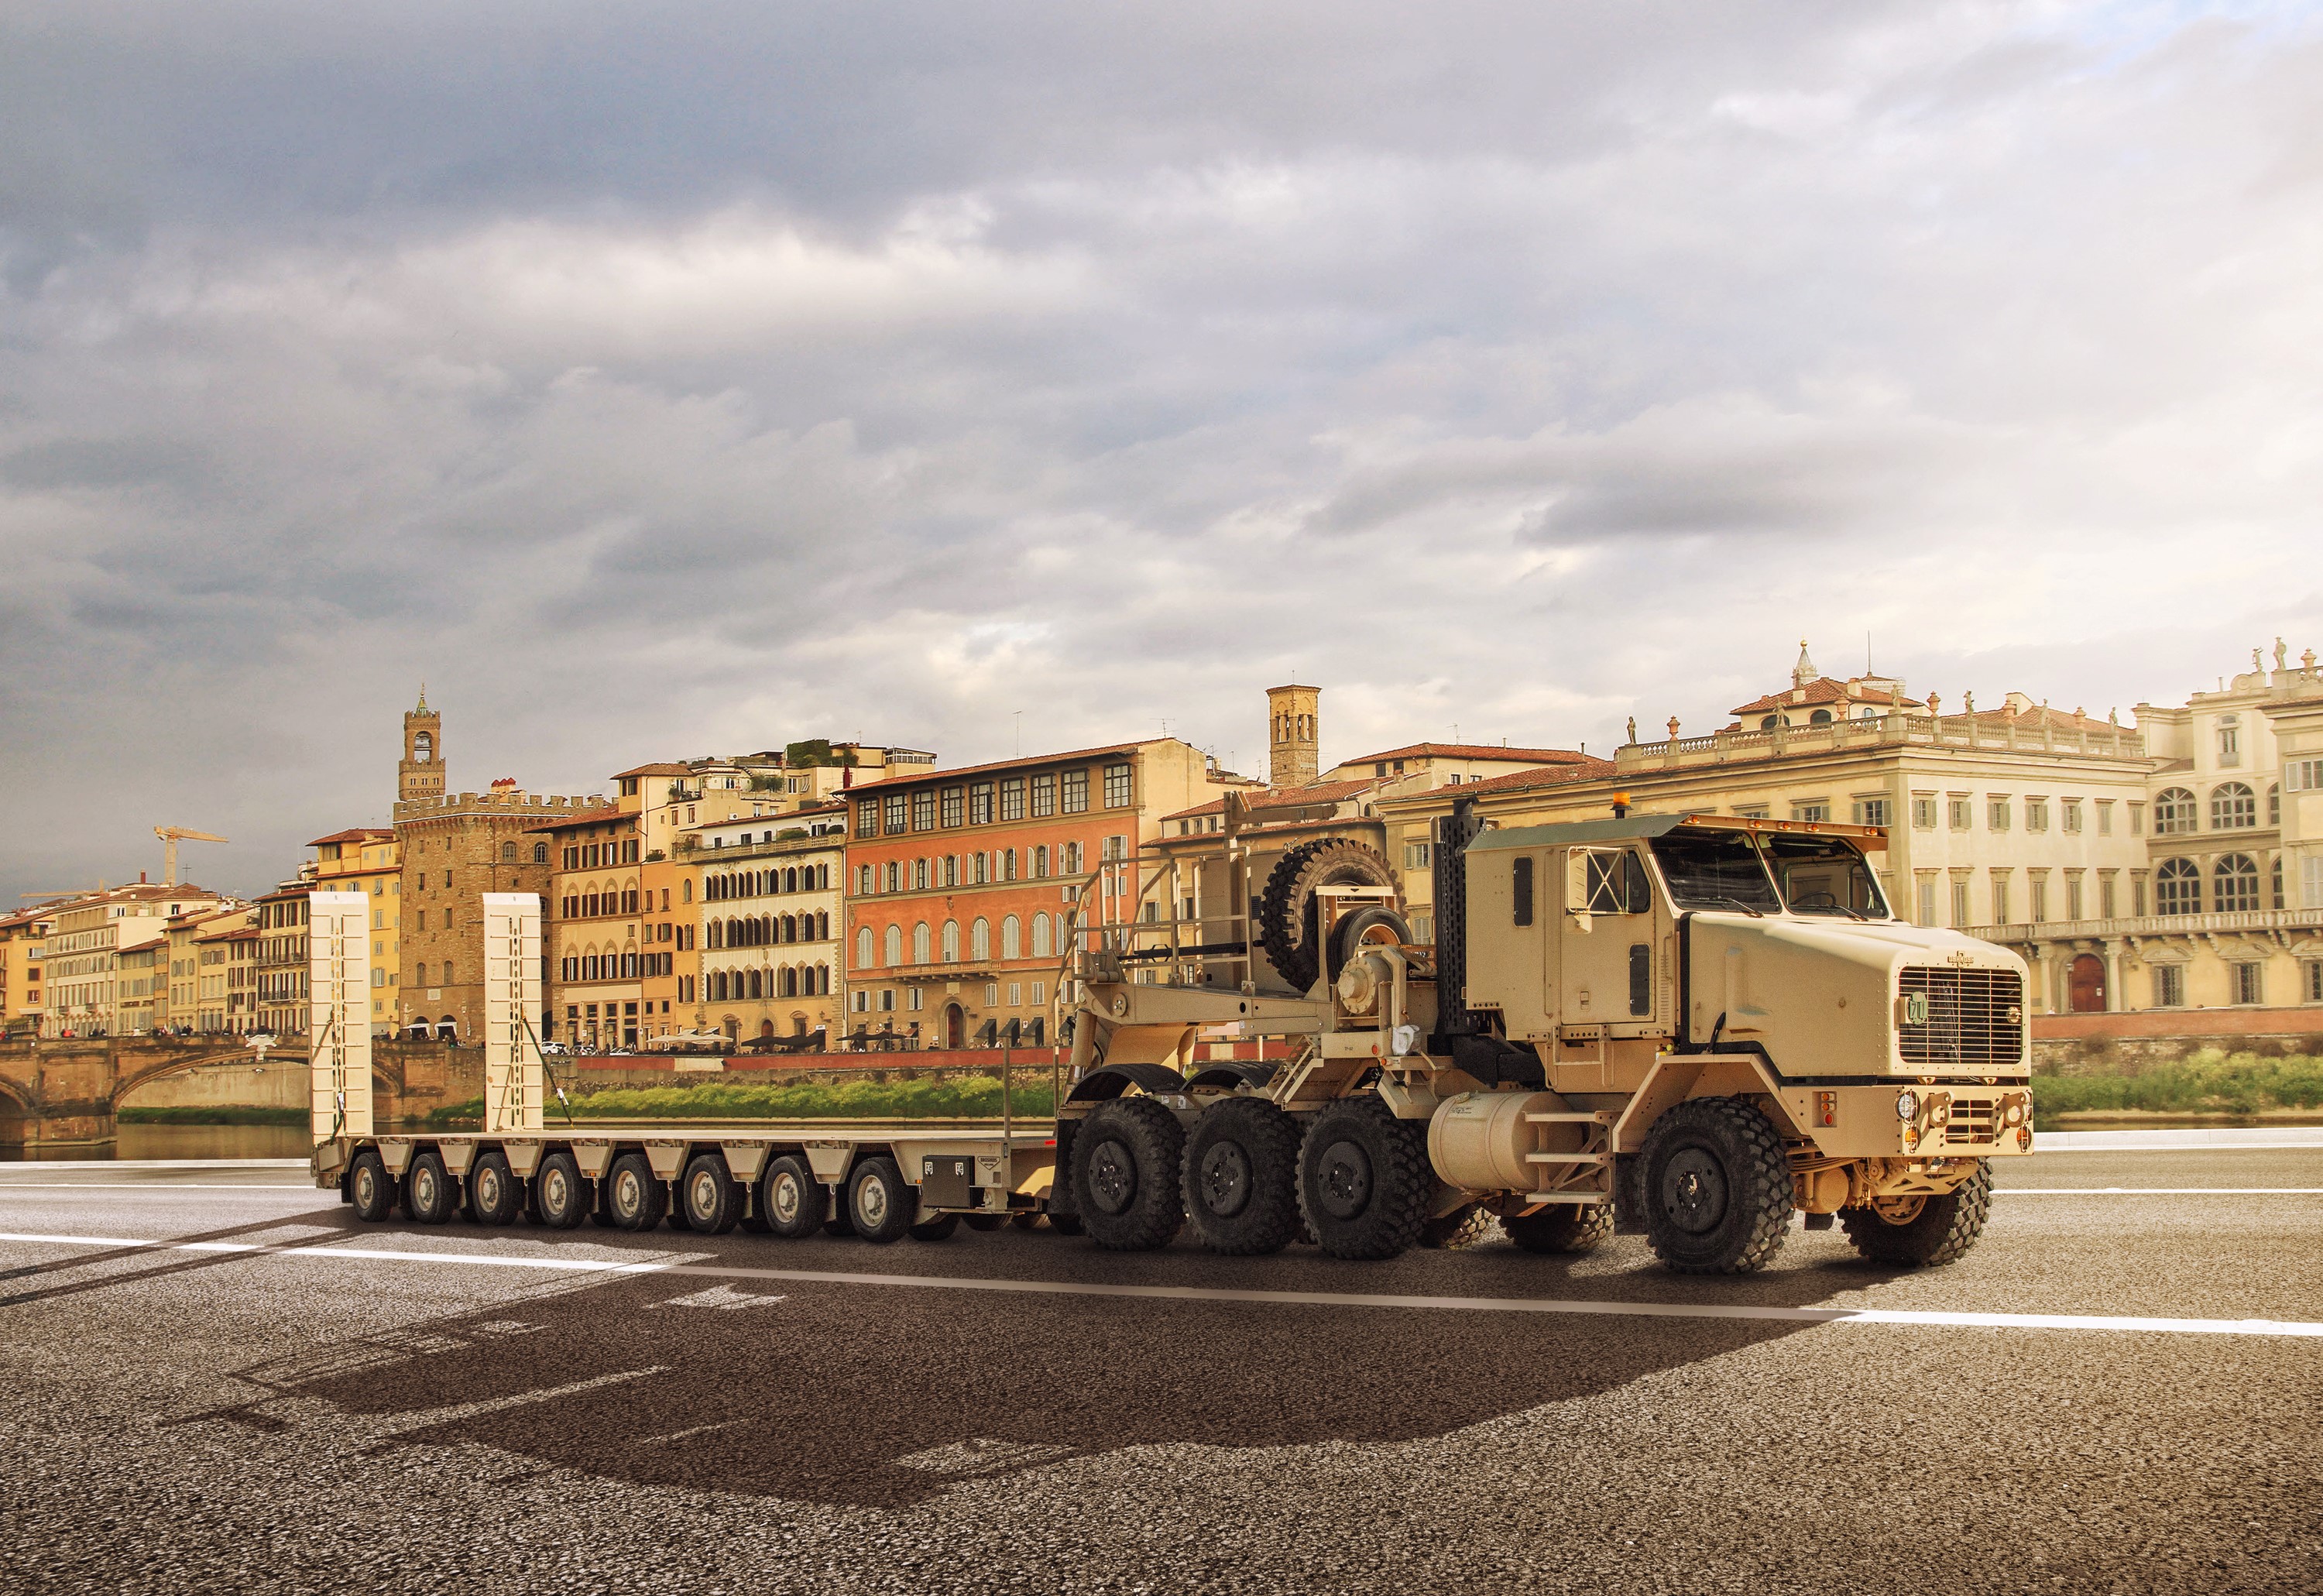 The Heavy Equipment Transporter (HET) ONS semitrailer delivers increased payload capability while gaining European road permissions.